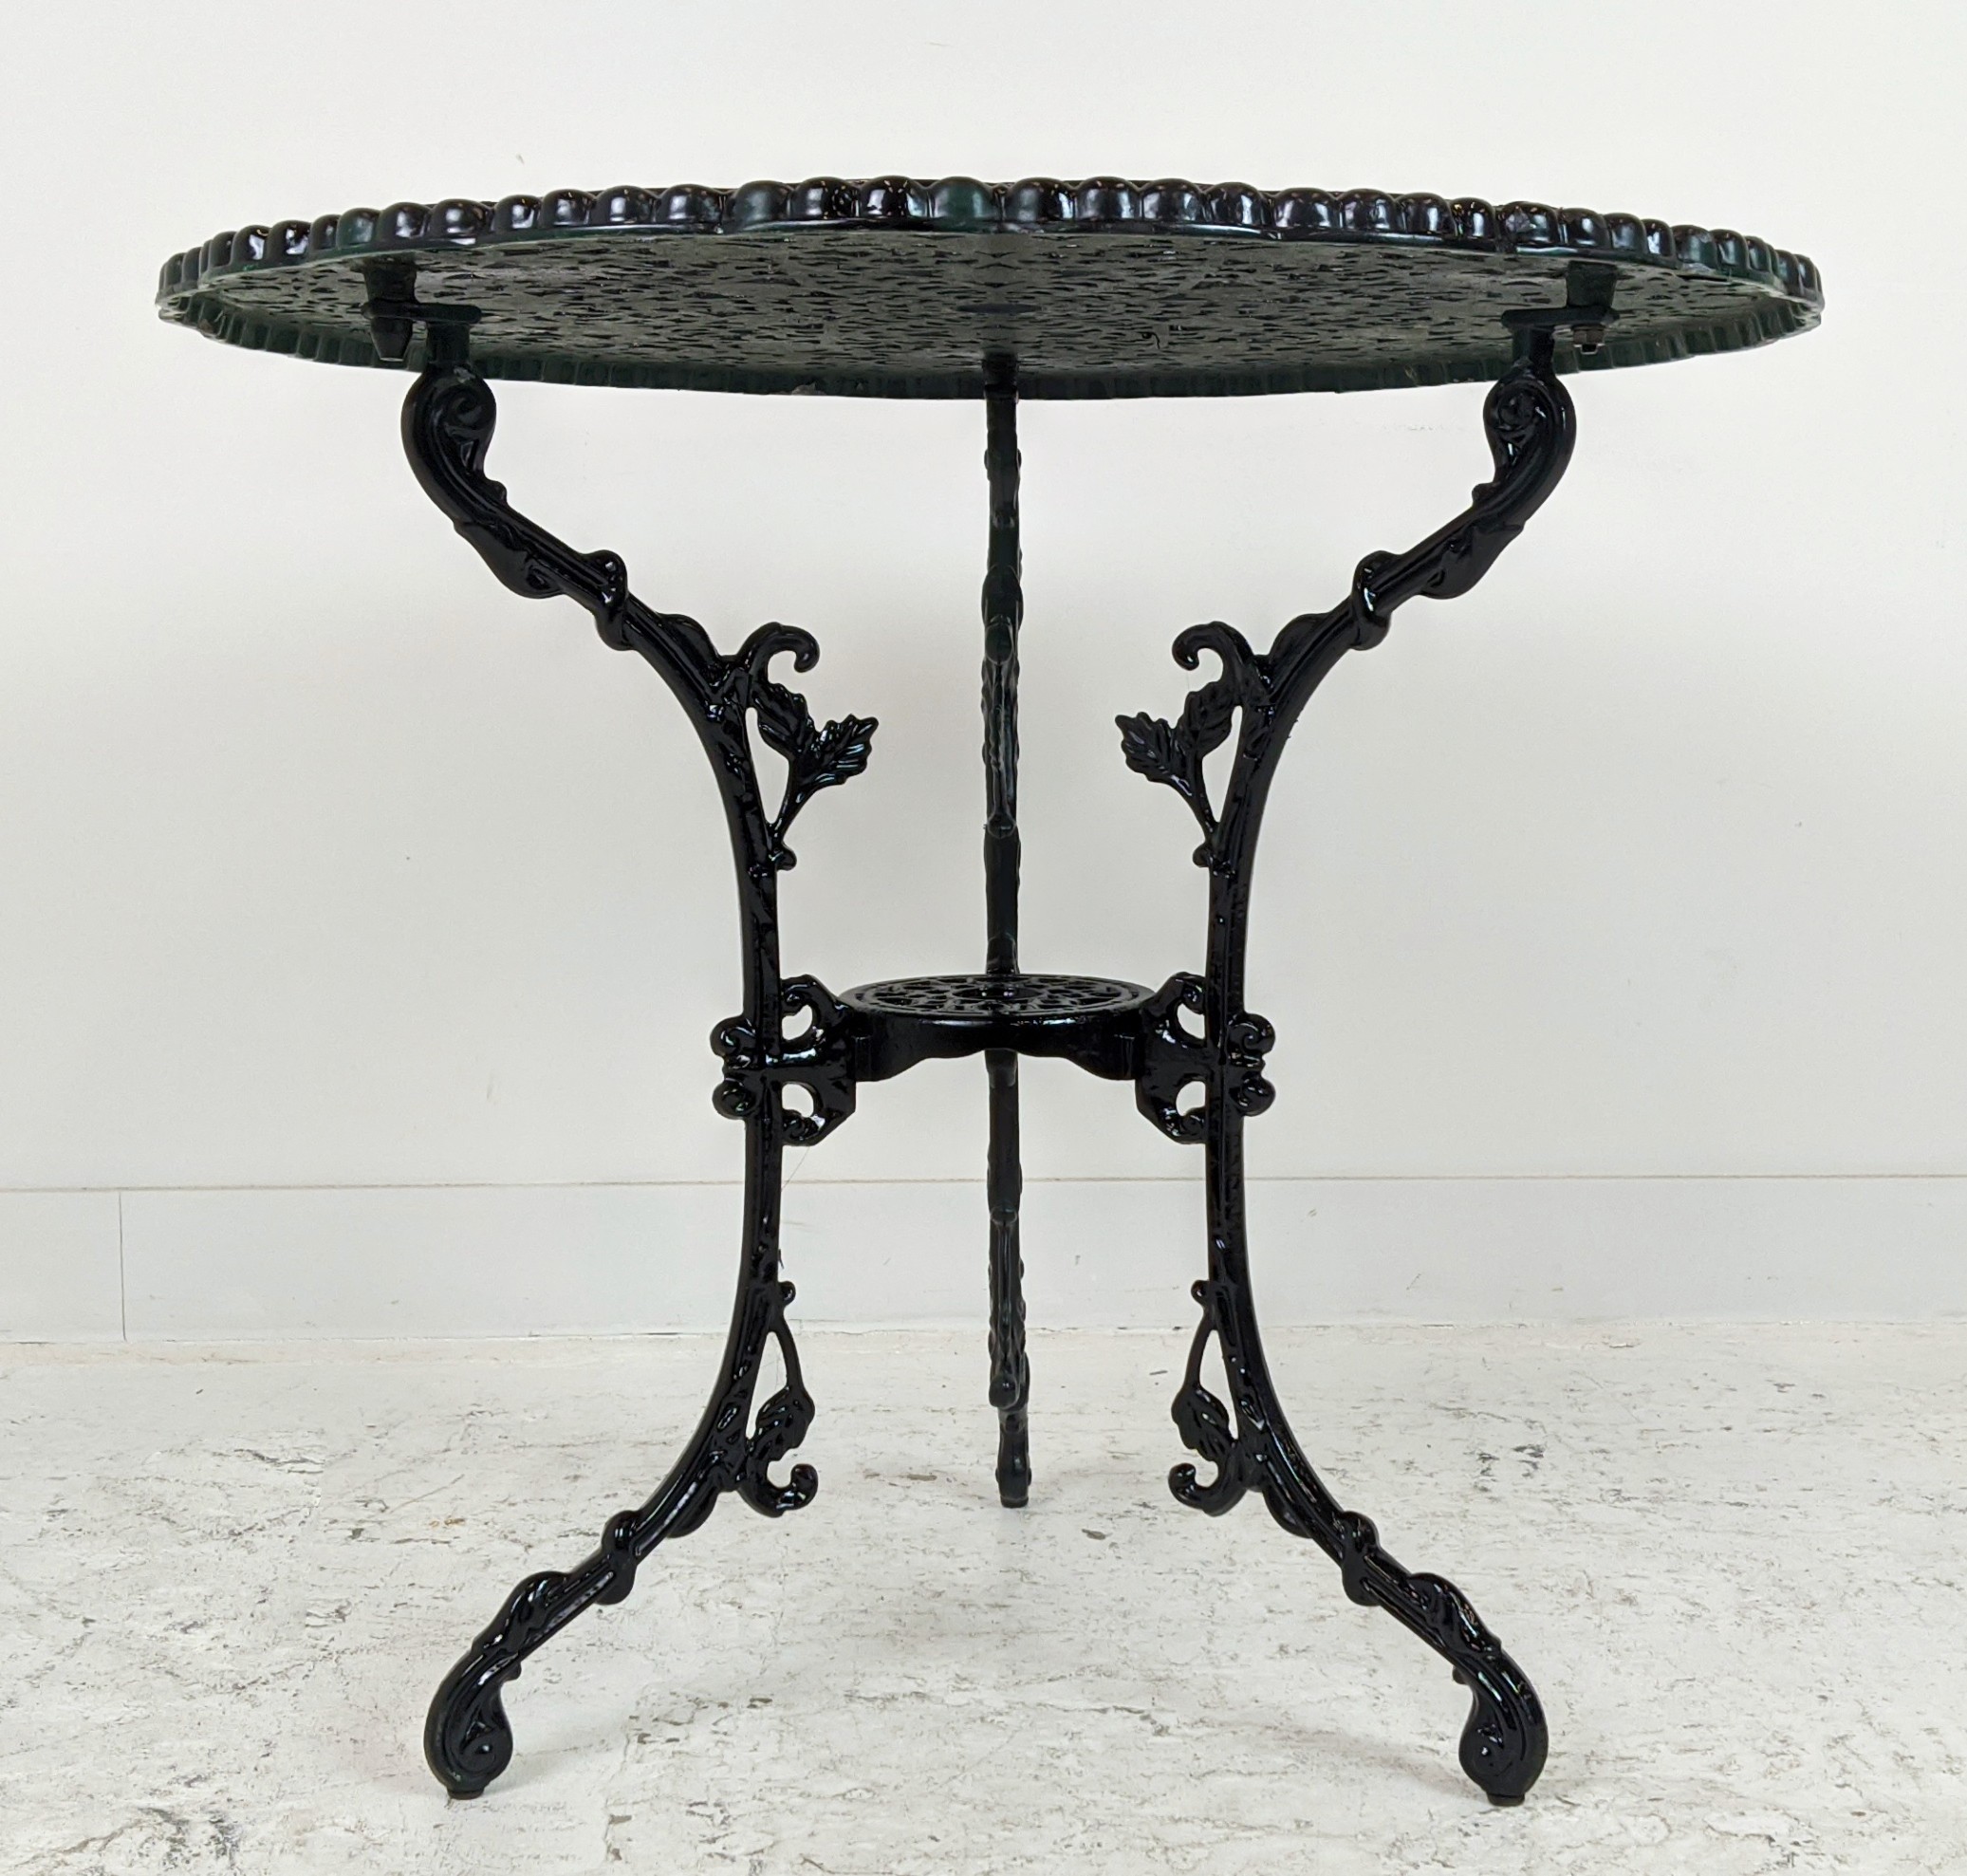 CIRCULAR GARDEN TABLE, black metal, 72cm H x 80cm and a set of four chairs, 85cm H x 42cm. (5) - Image 7 of 8